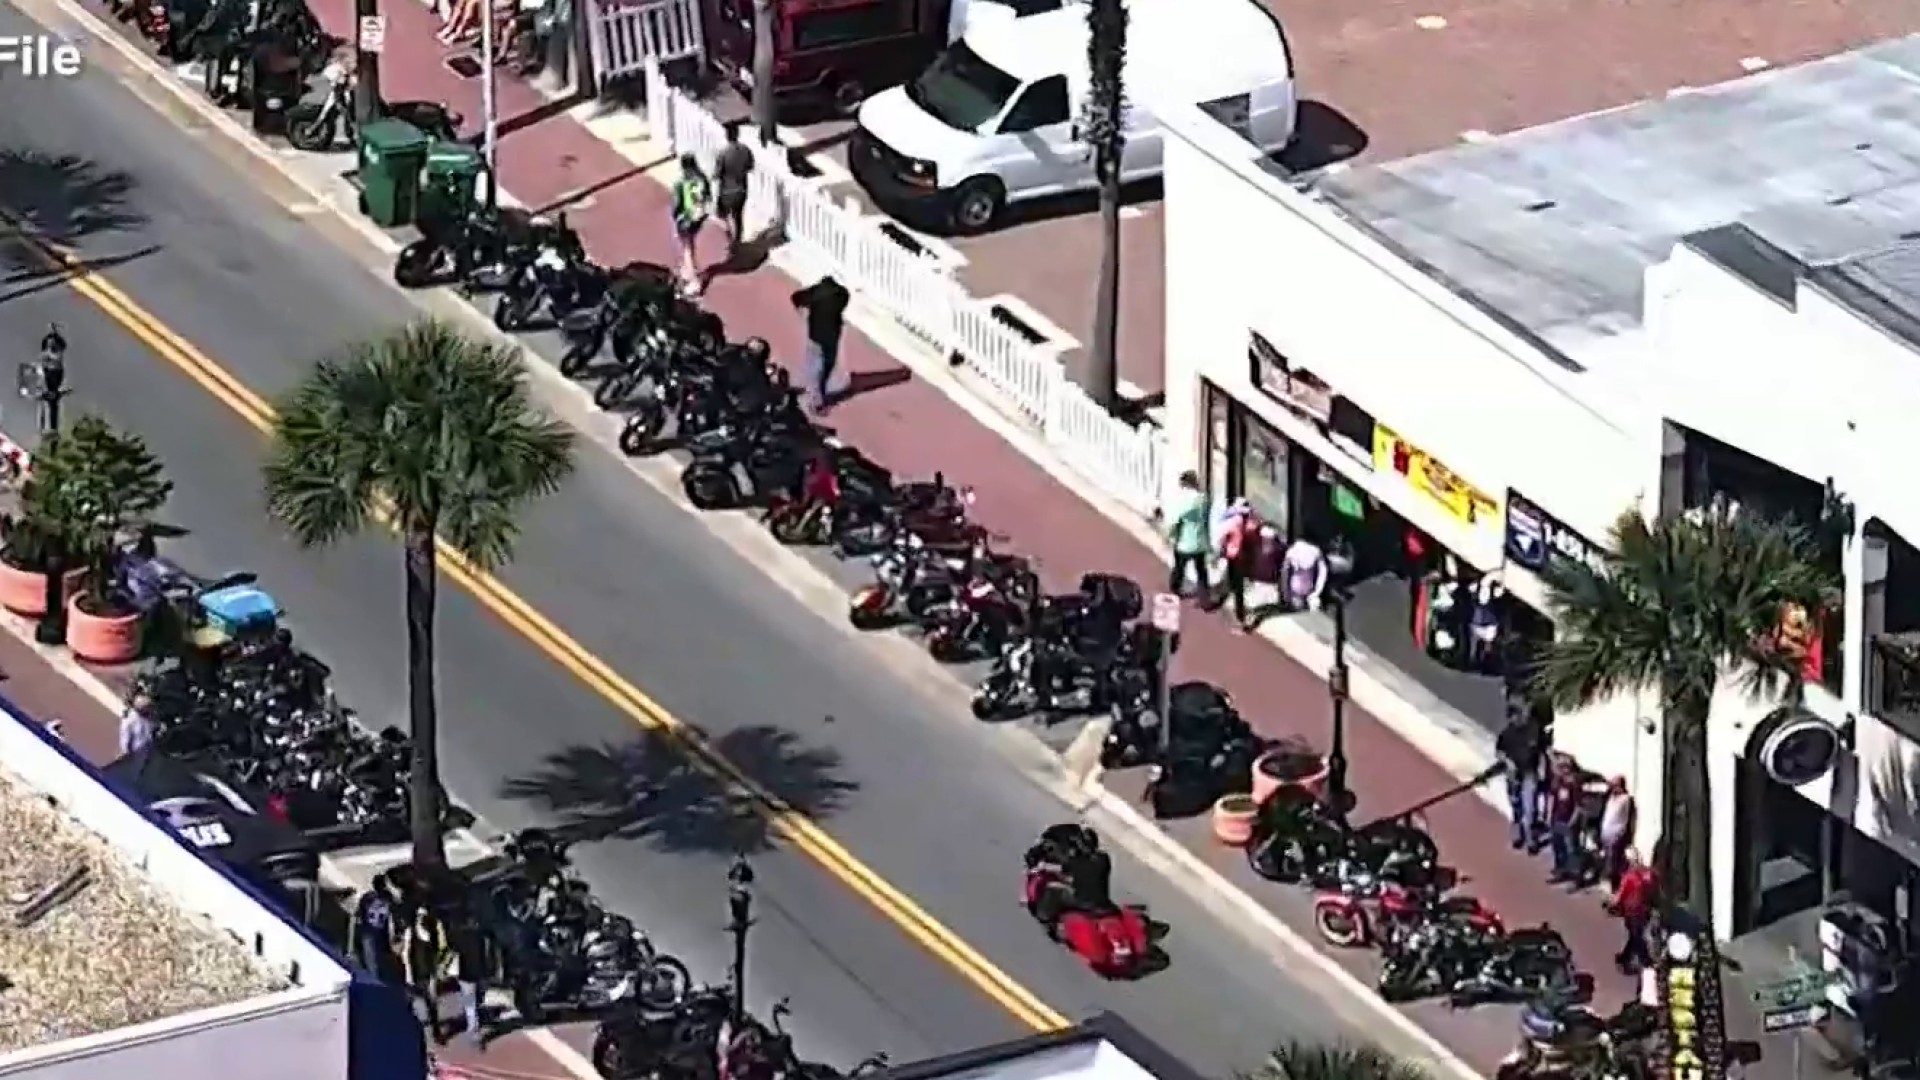 Bike Week will happen in Daytona Beach this year, but with these changes